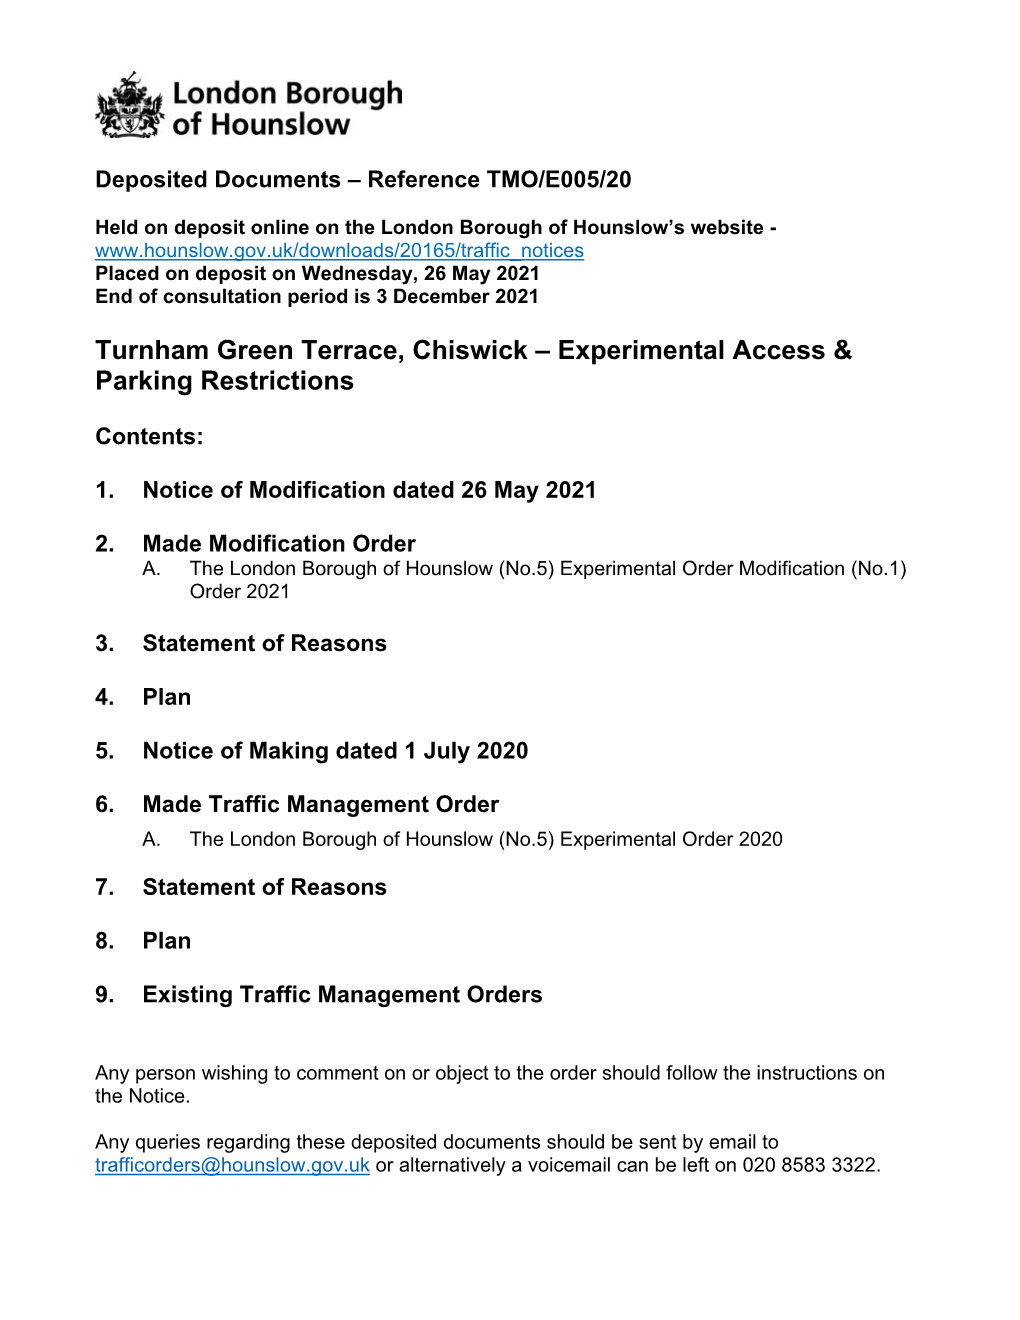 Turnham Green Terrace, Chiswick – Experimental Access & Parking Restrictions